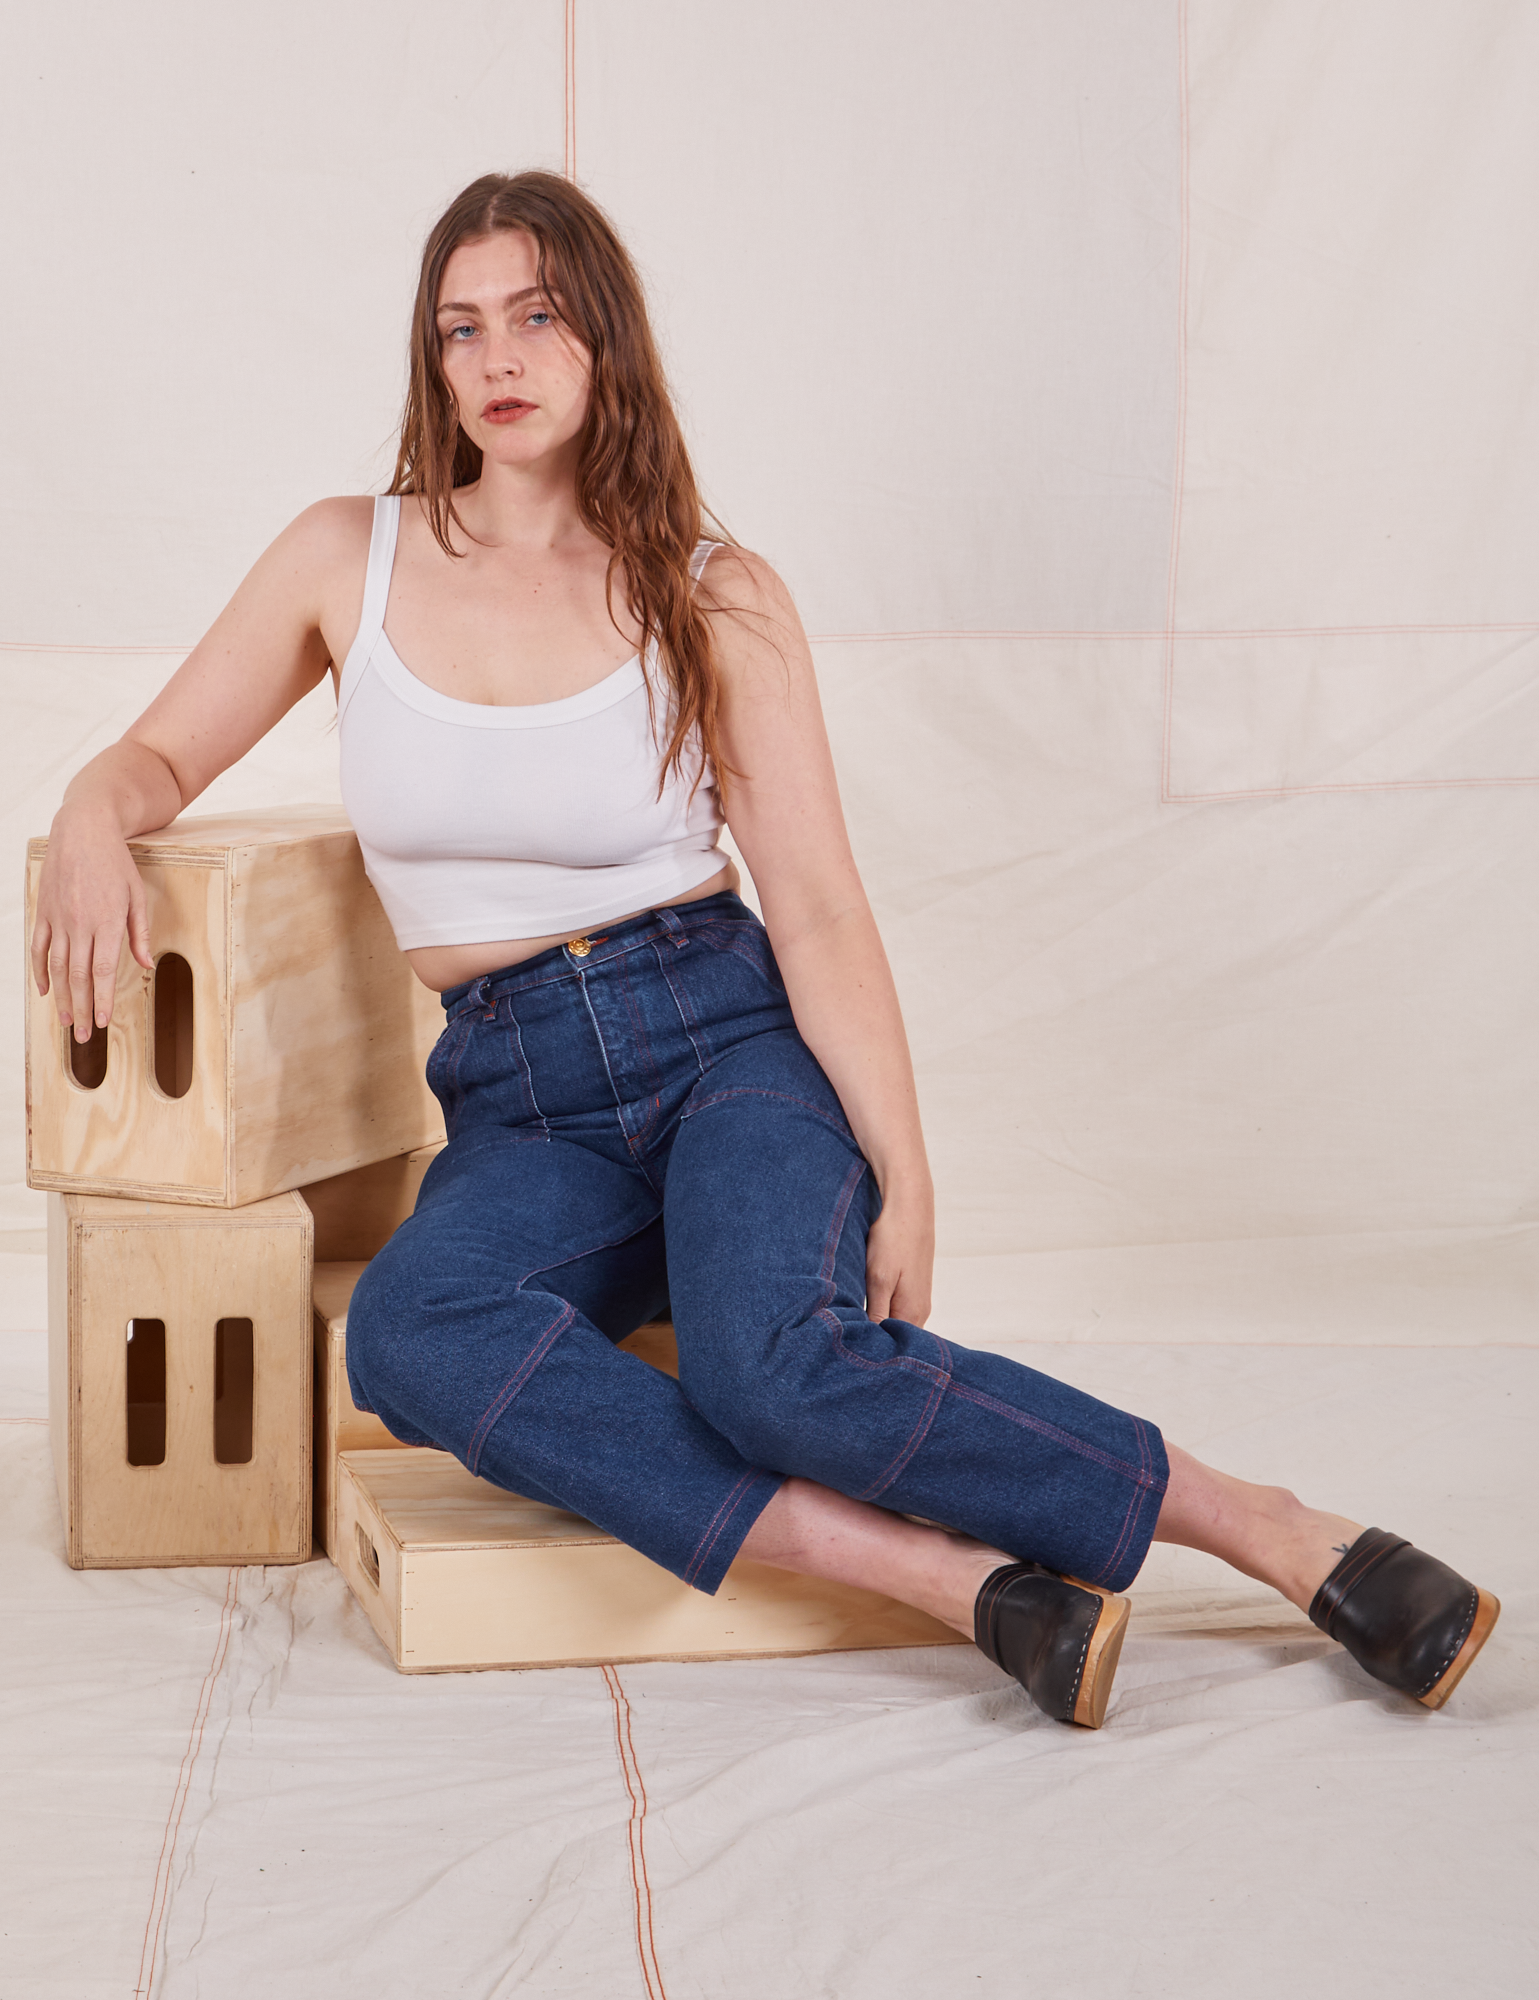 Allison is wearing Carpenter Jeans in Dark Wash and Cropped Cami in vintage tee off-white